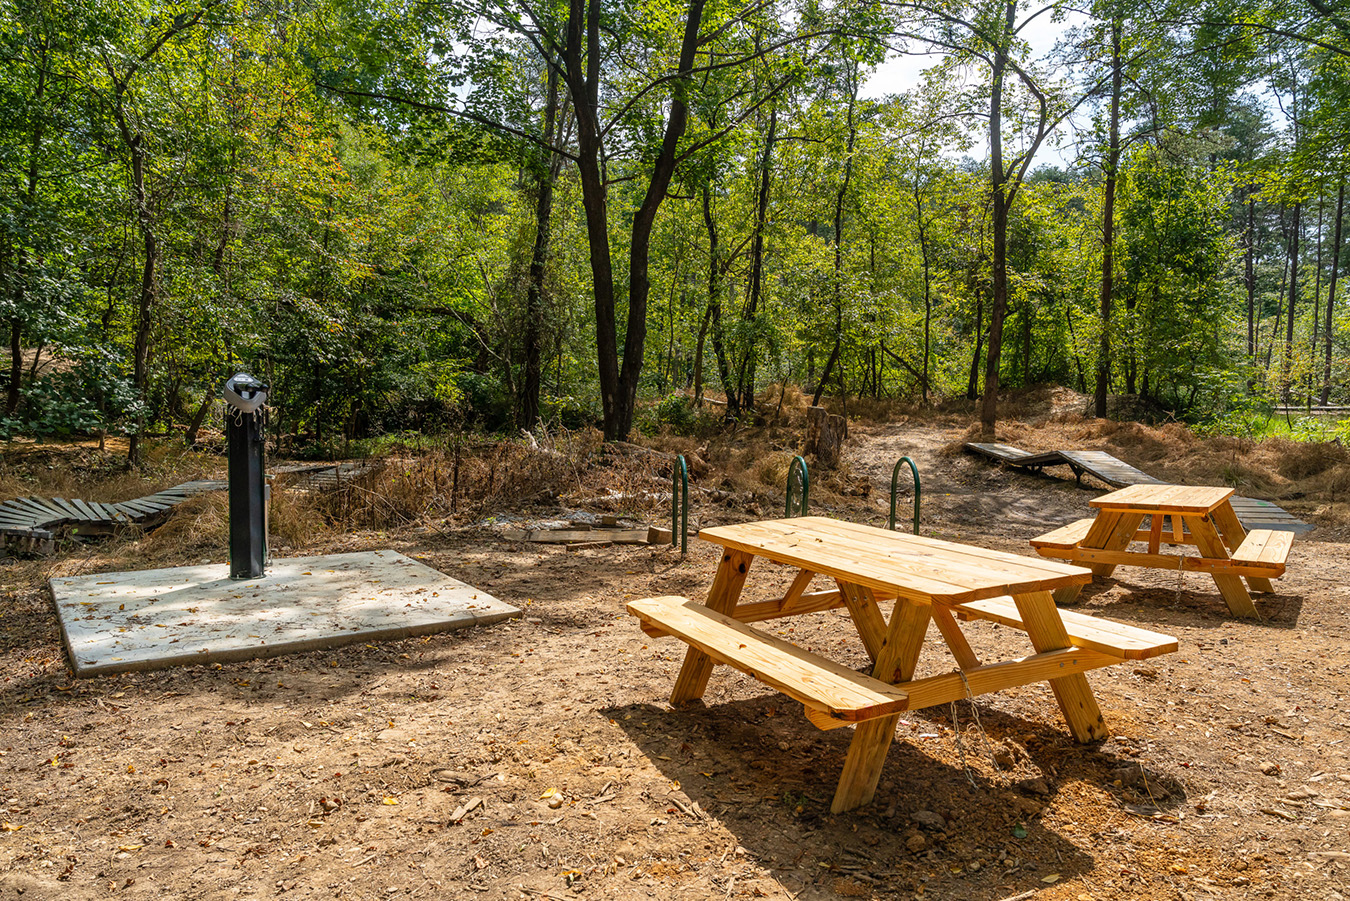 The Pit at Fairland Bike Park